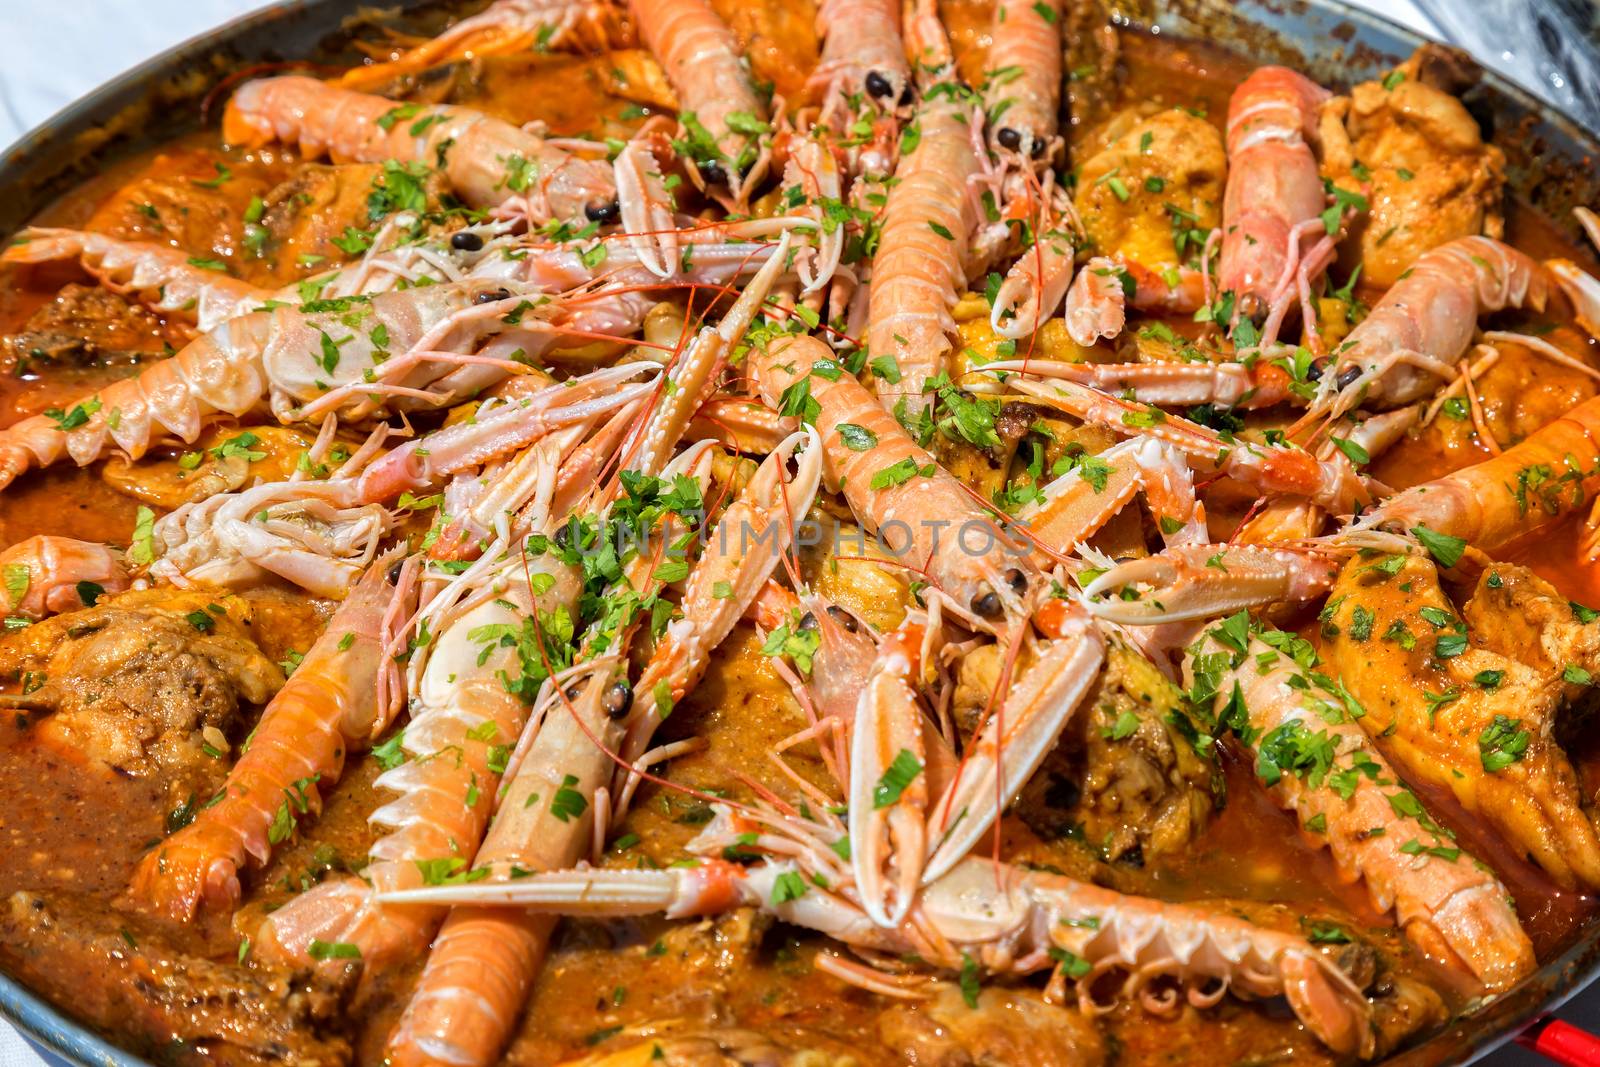 Paella with seafood and vegetables in a pan by Digoarpi